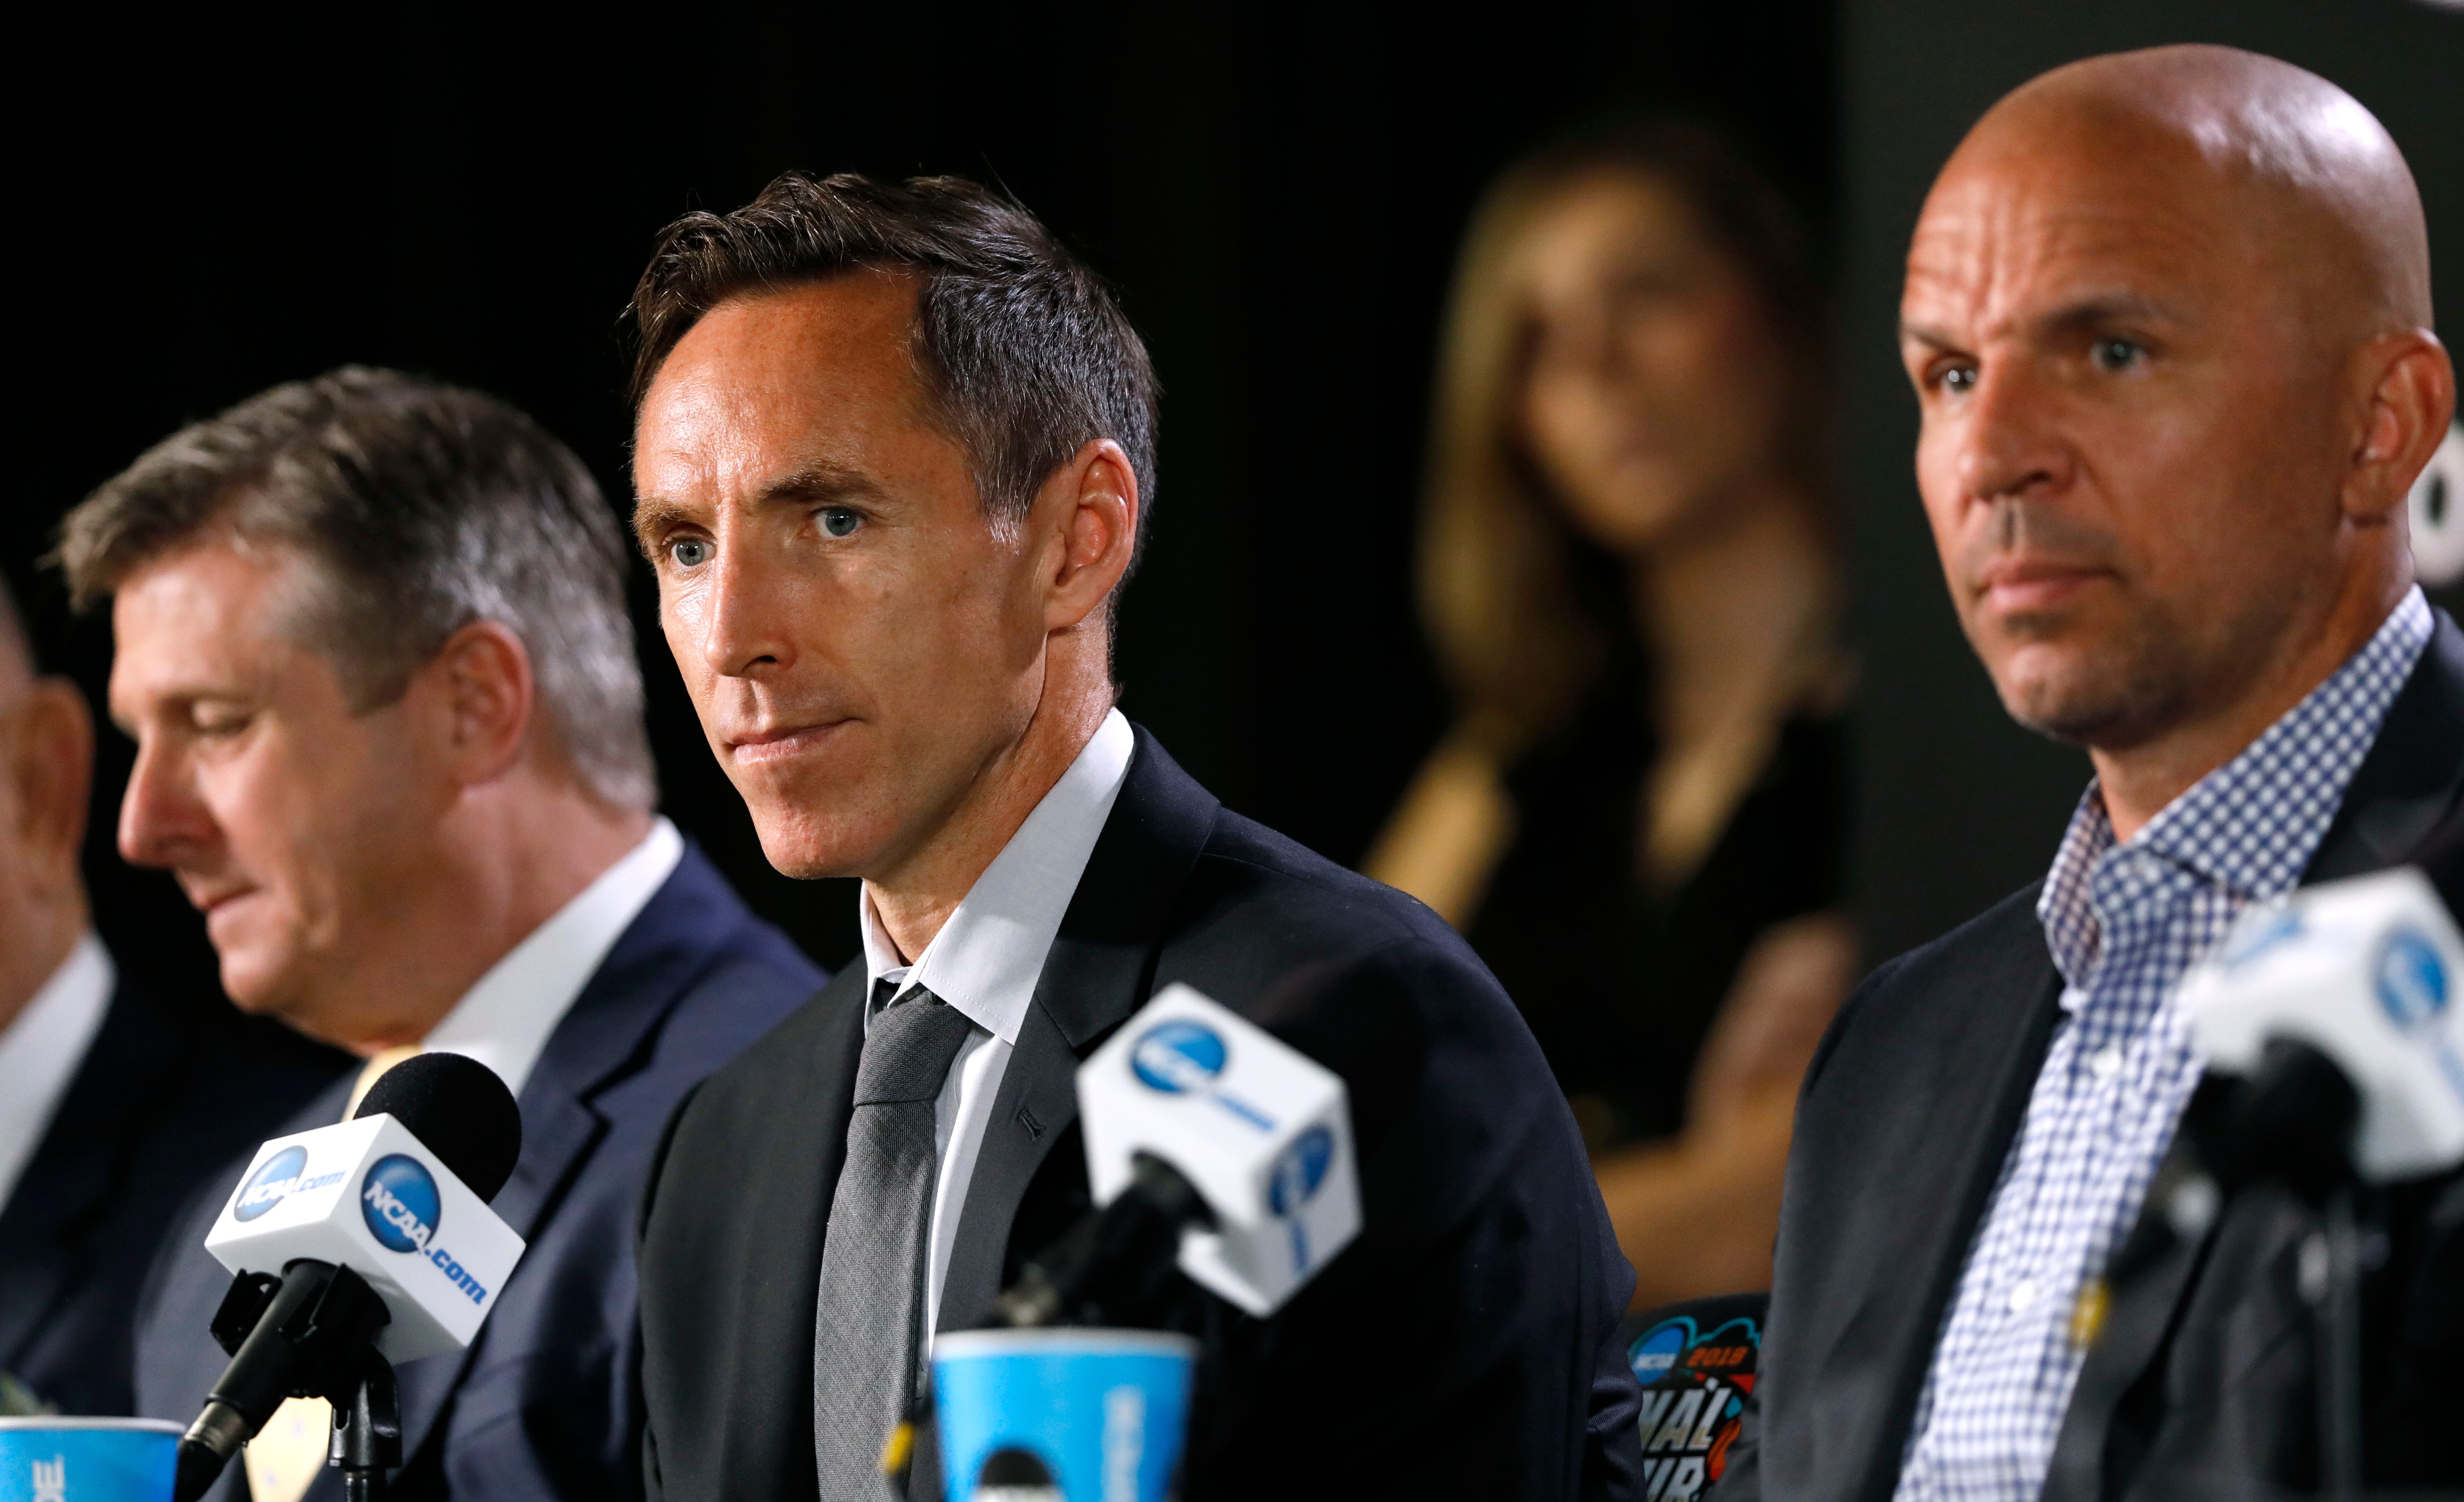 Former NBA player Steve Nash, center, speaks as former NBA player Jason Kidd, right, looks on during a news conference for the Naismith Memorial Basketball Hall of Fame class of 2018 announcement, Saturday, March 31, 2018, in San Antonio.